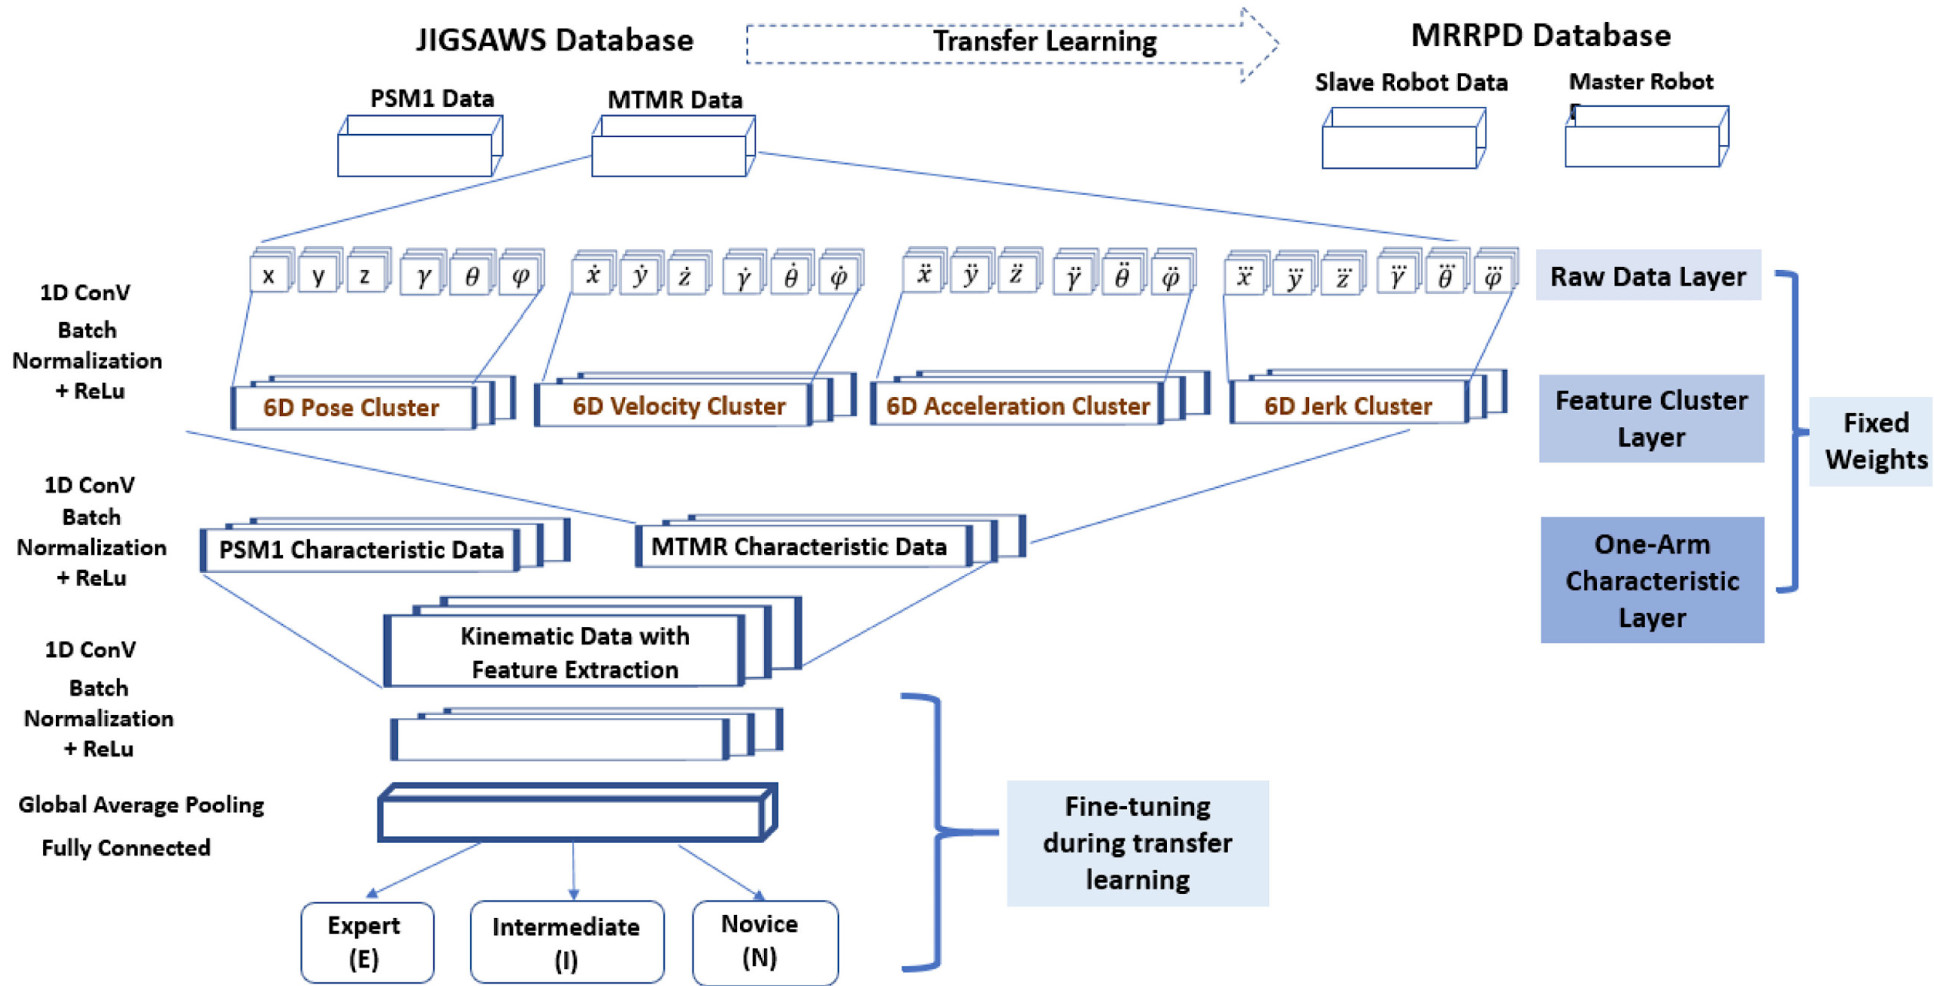 The architecture for the deep neural network model and the implementation of transfer learning